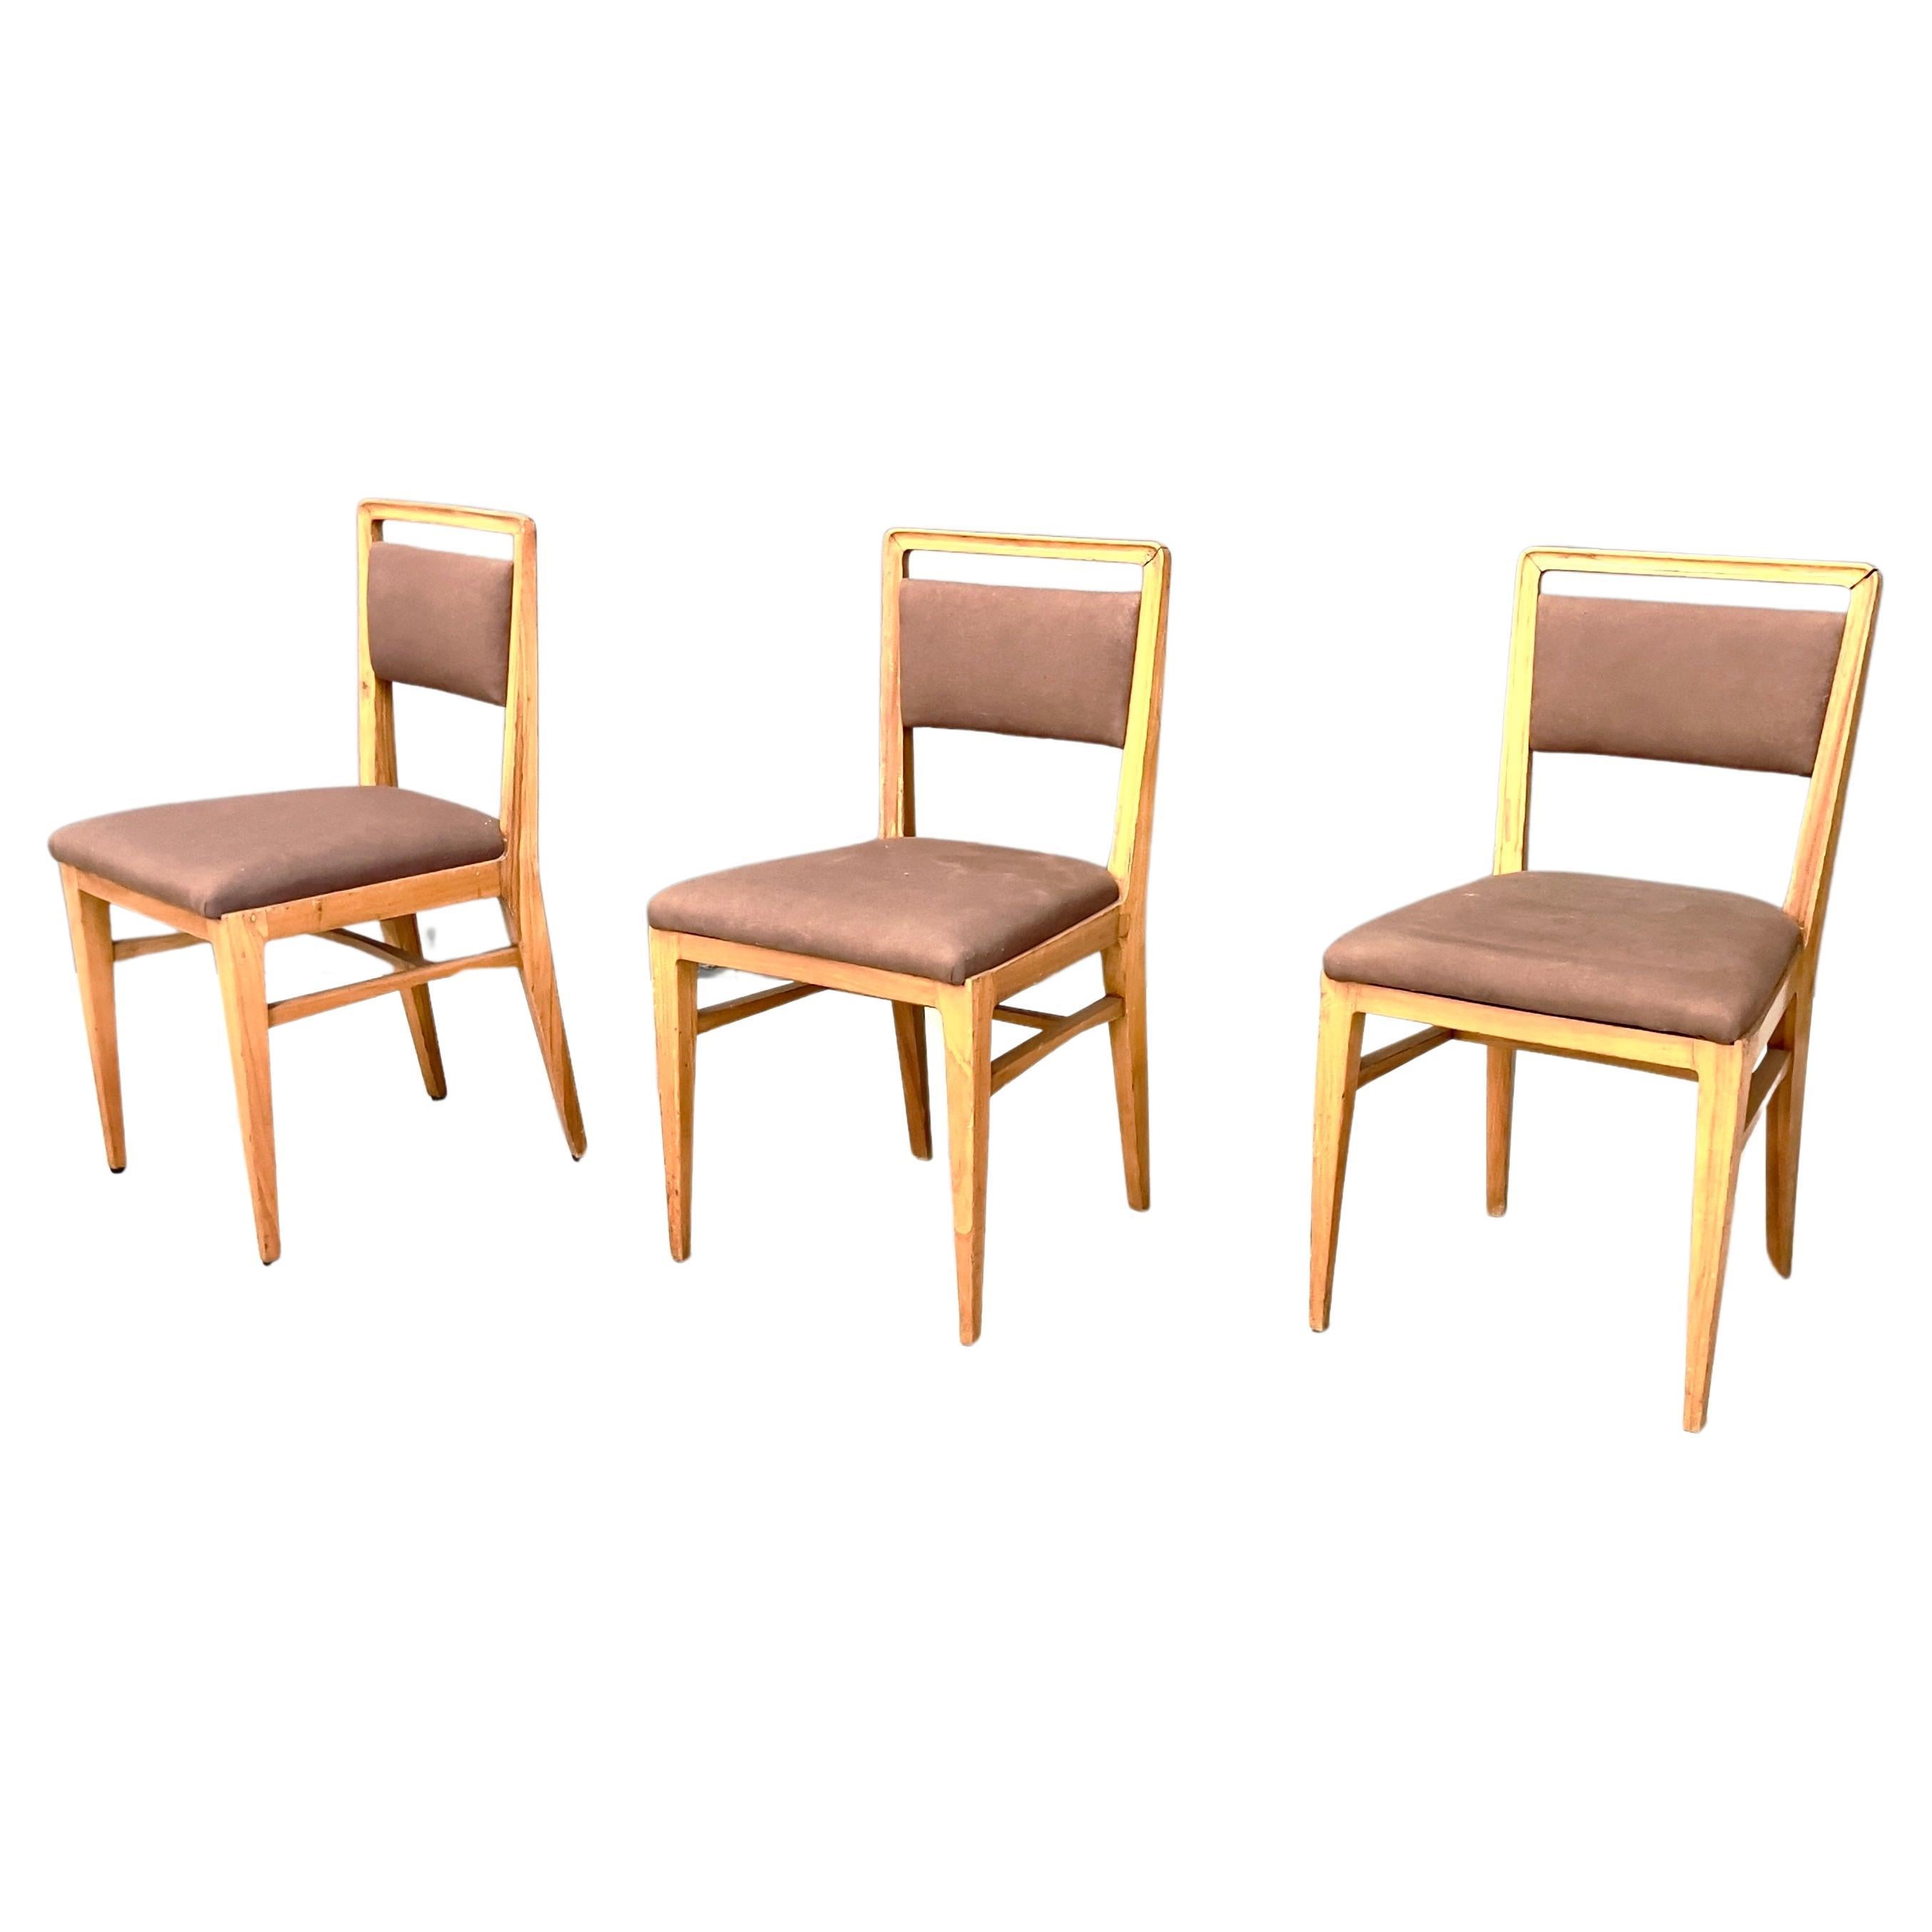 Three Chairs Attributed to Gio Ponti, 1950s